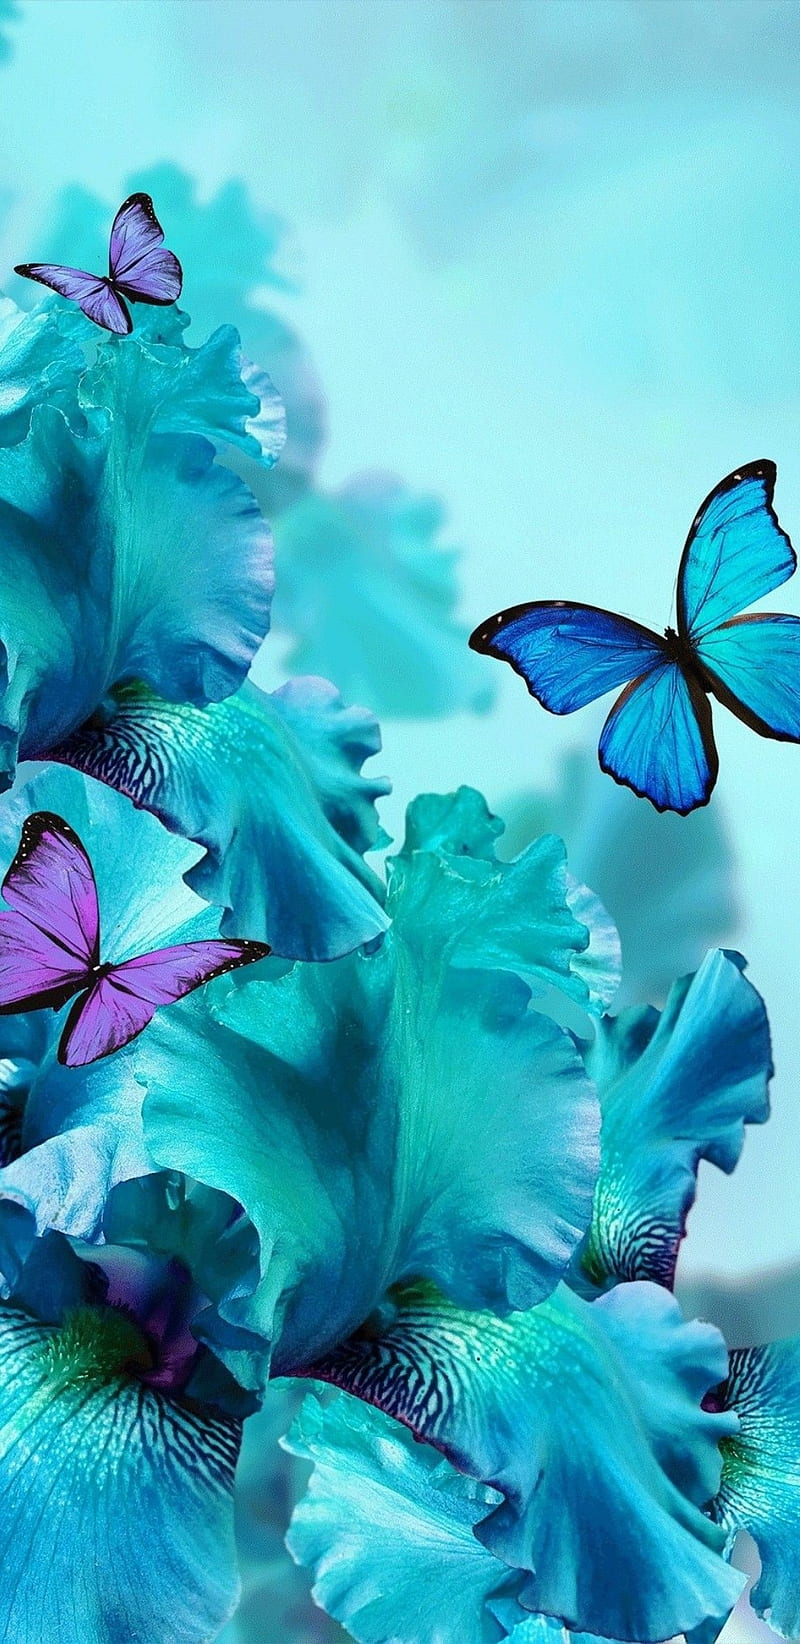 1366x768px, 720P free download | Teal Orchids, bonito, blue ...